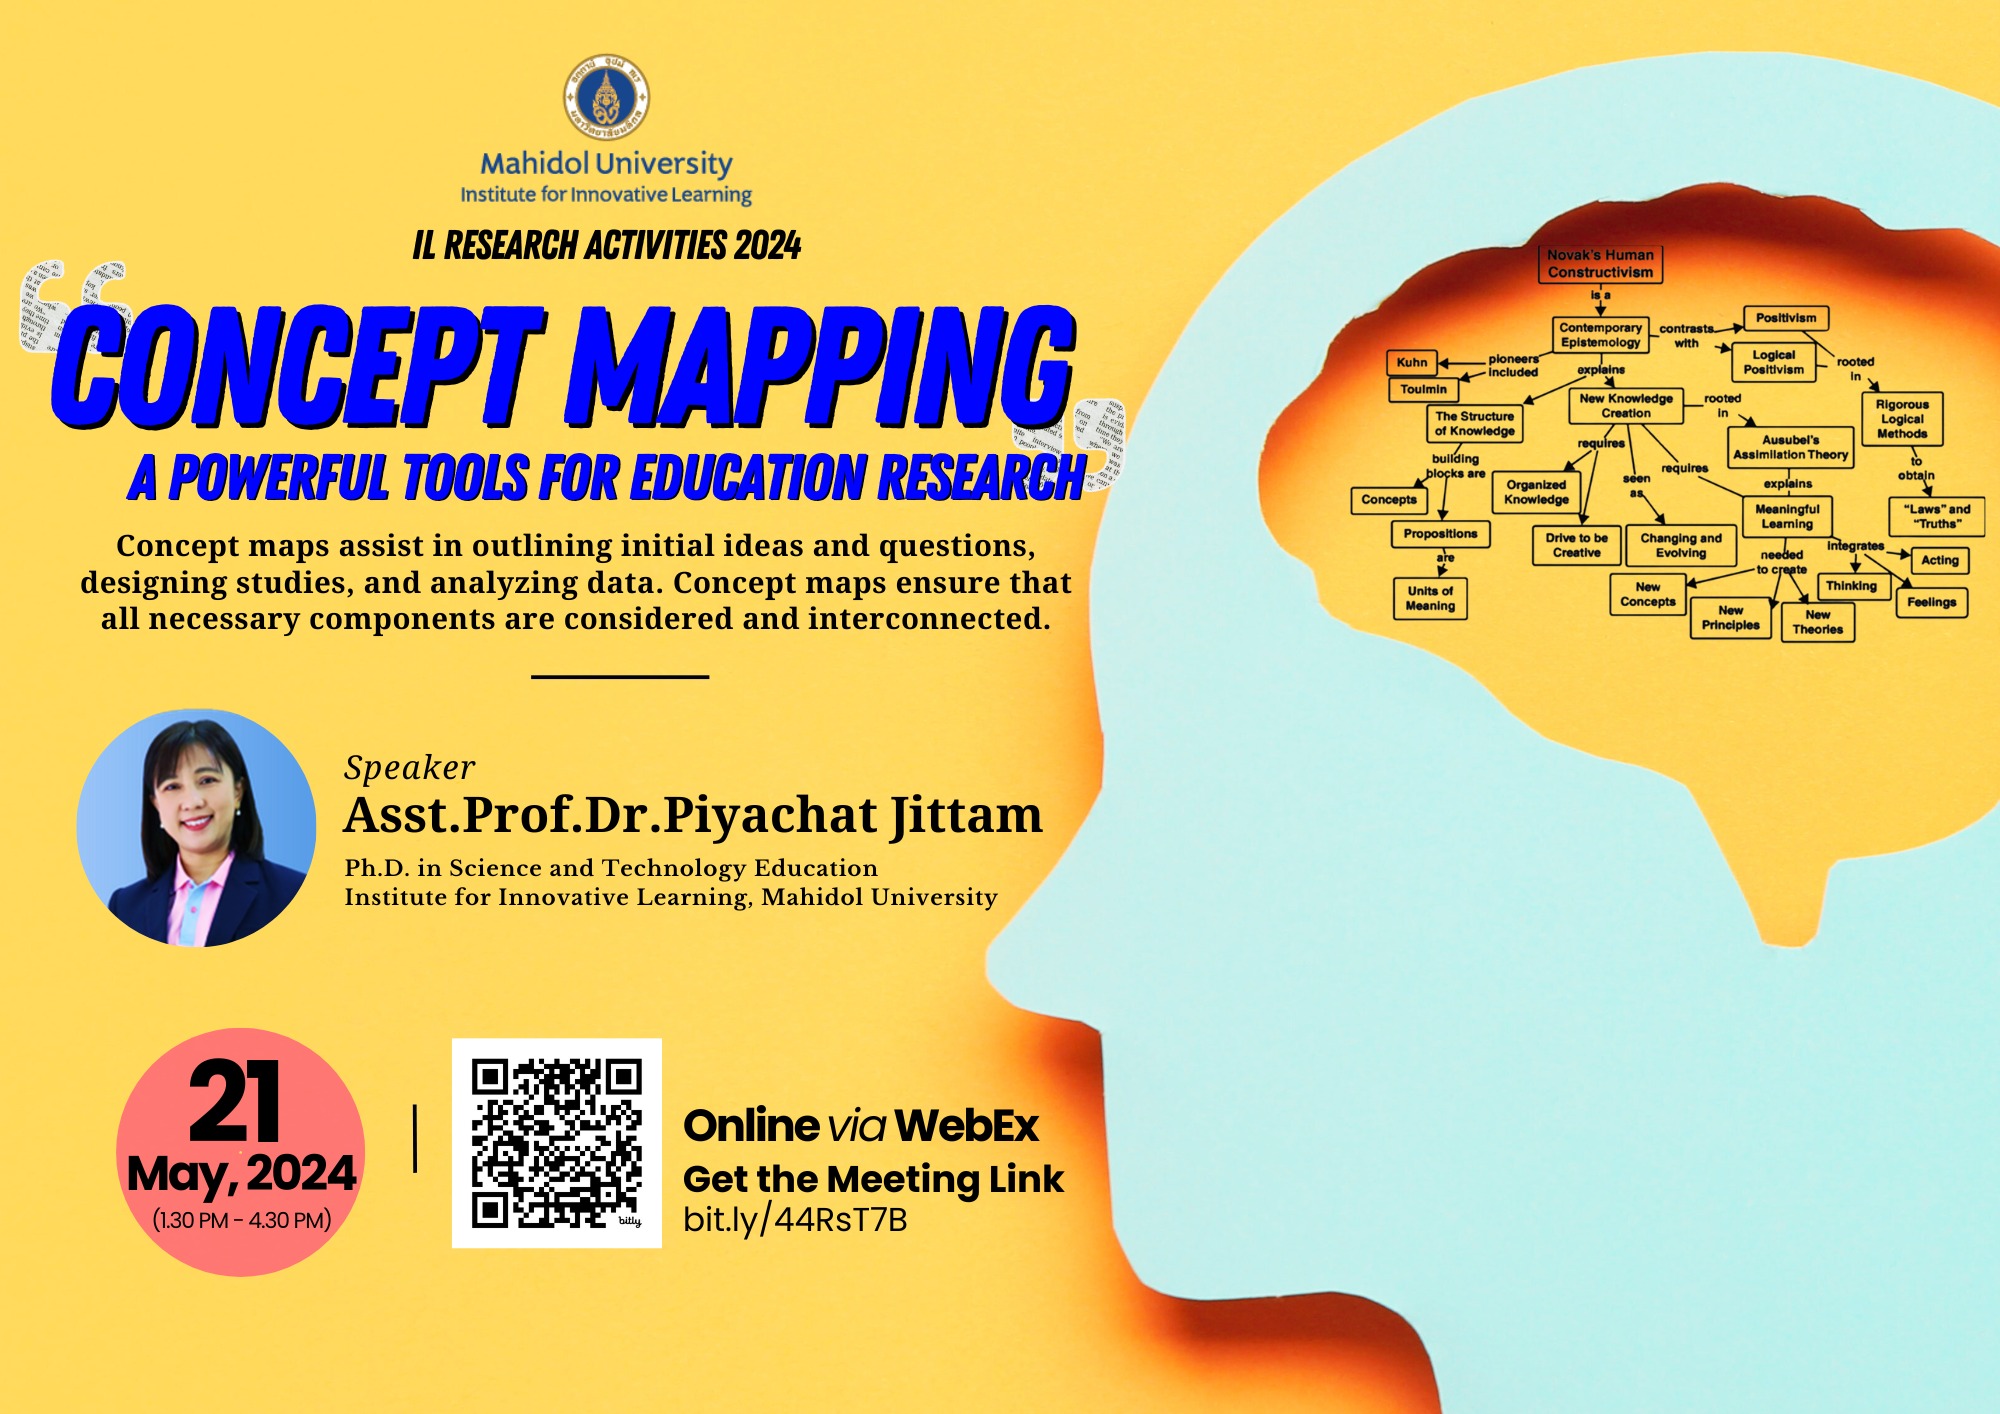 IL Research Activity “Concept Mapping: A Powerful Tool for Education Research”